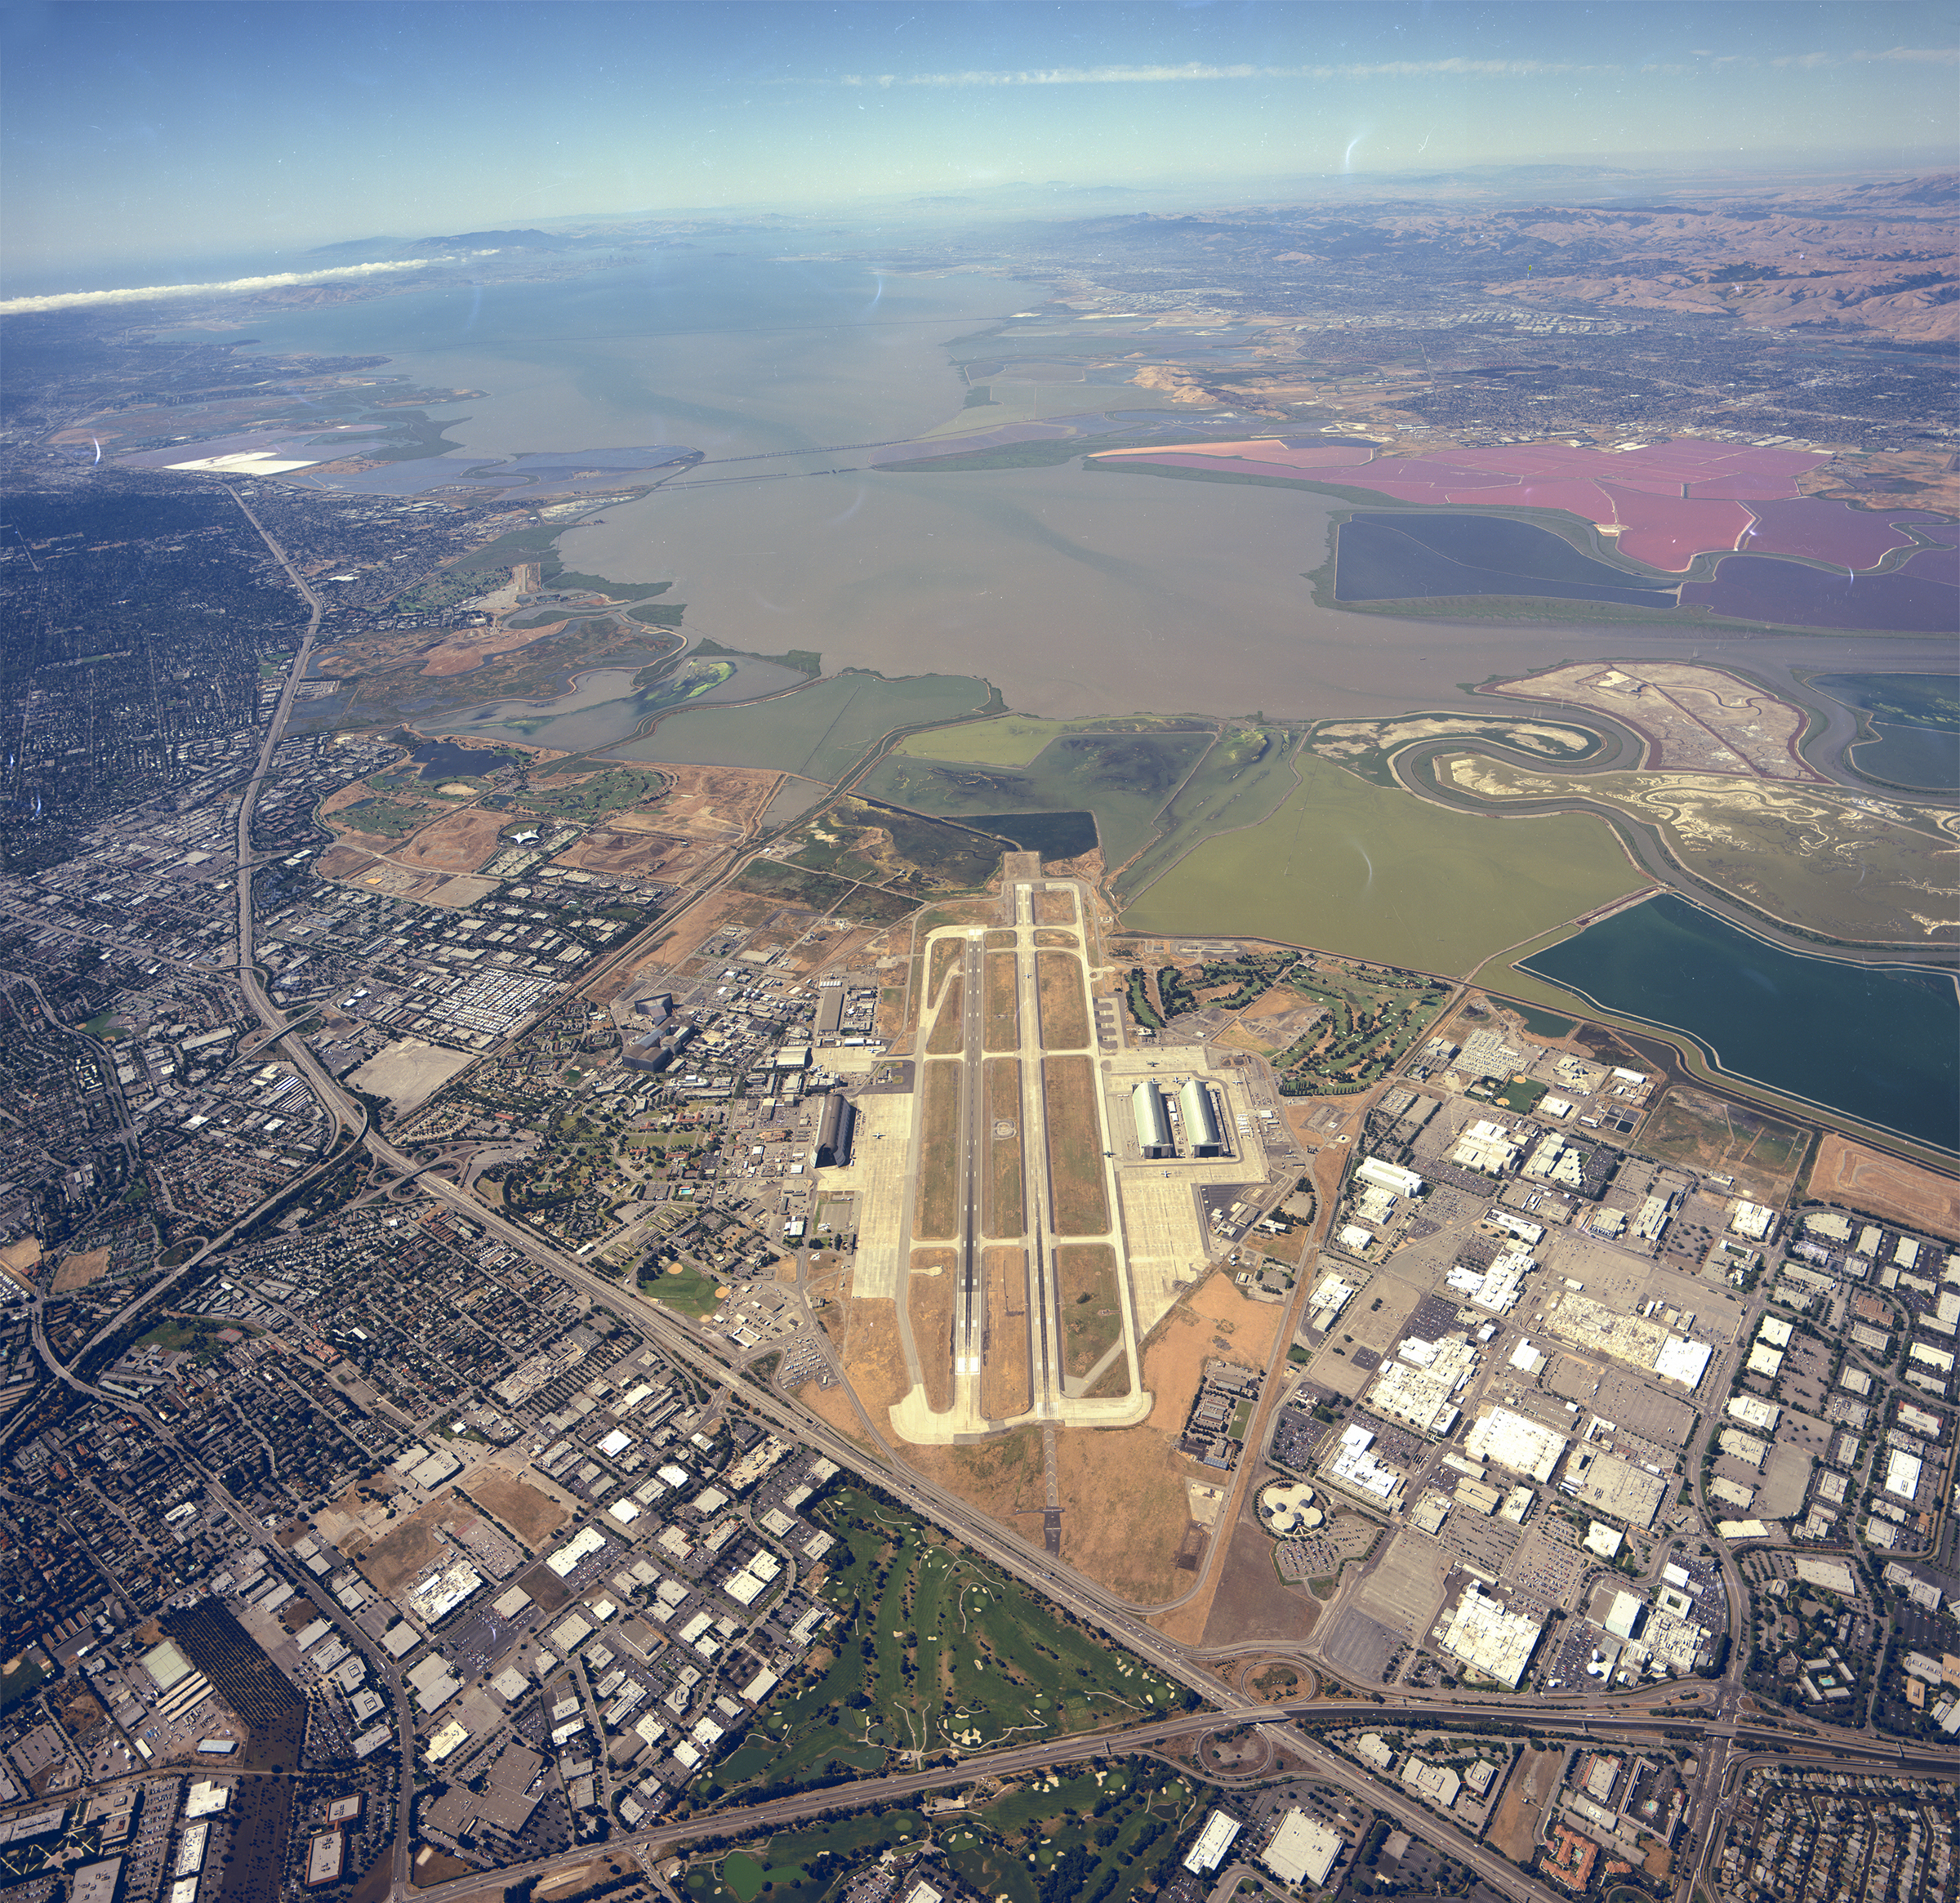 An aerial view of Moffett Field, its adjacent wetlands, the San Francisco Bay and nearby landscapes, and the cities of Mountain View and Sunnyvale.